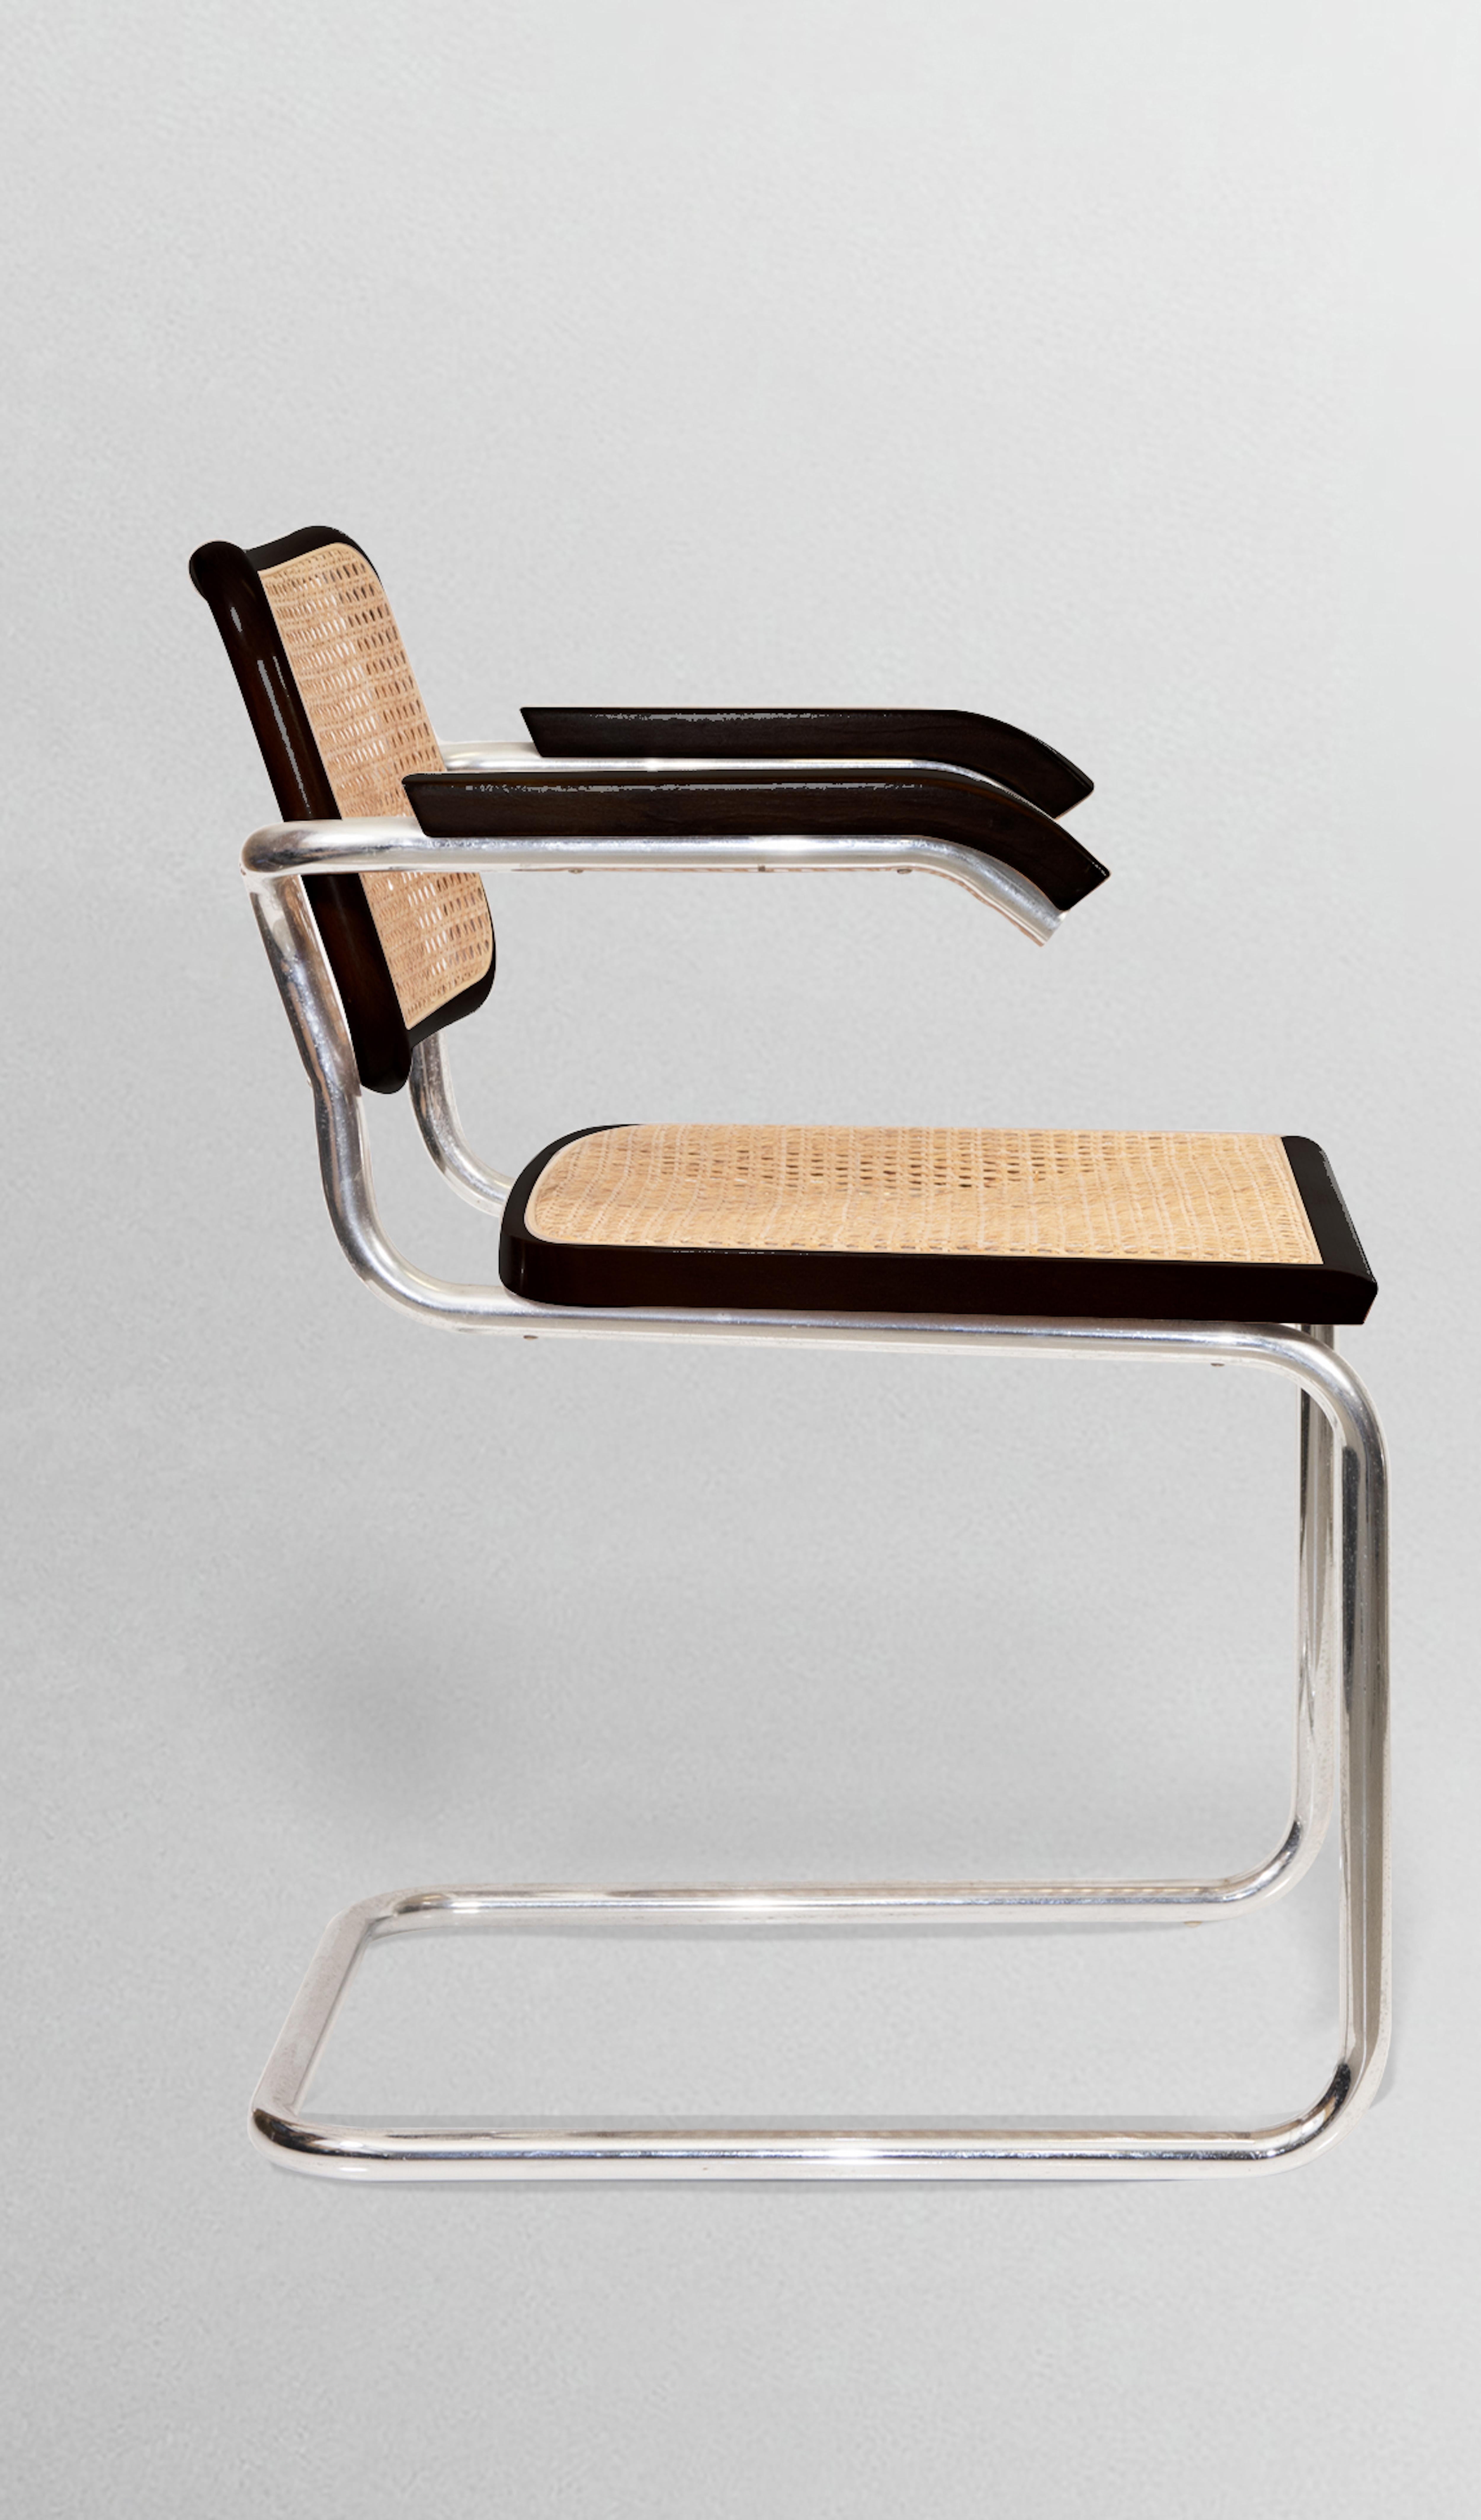 Cesca Chairs is a set of 8 chairs designed by Marcel Breuer and realized by Dino Gavina in the 1970s.

Load-bearing structure in mannesmann-type continuous tubular steel, cold-bent chrome-plated. 
Seat and backrest made of black lacquered wooden